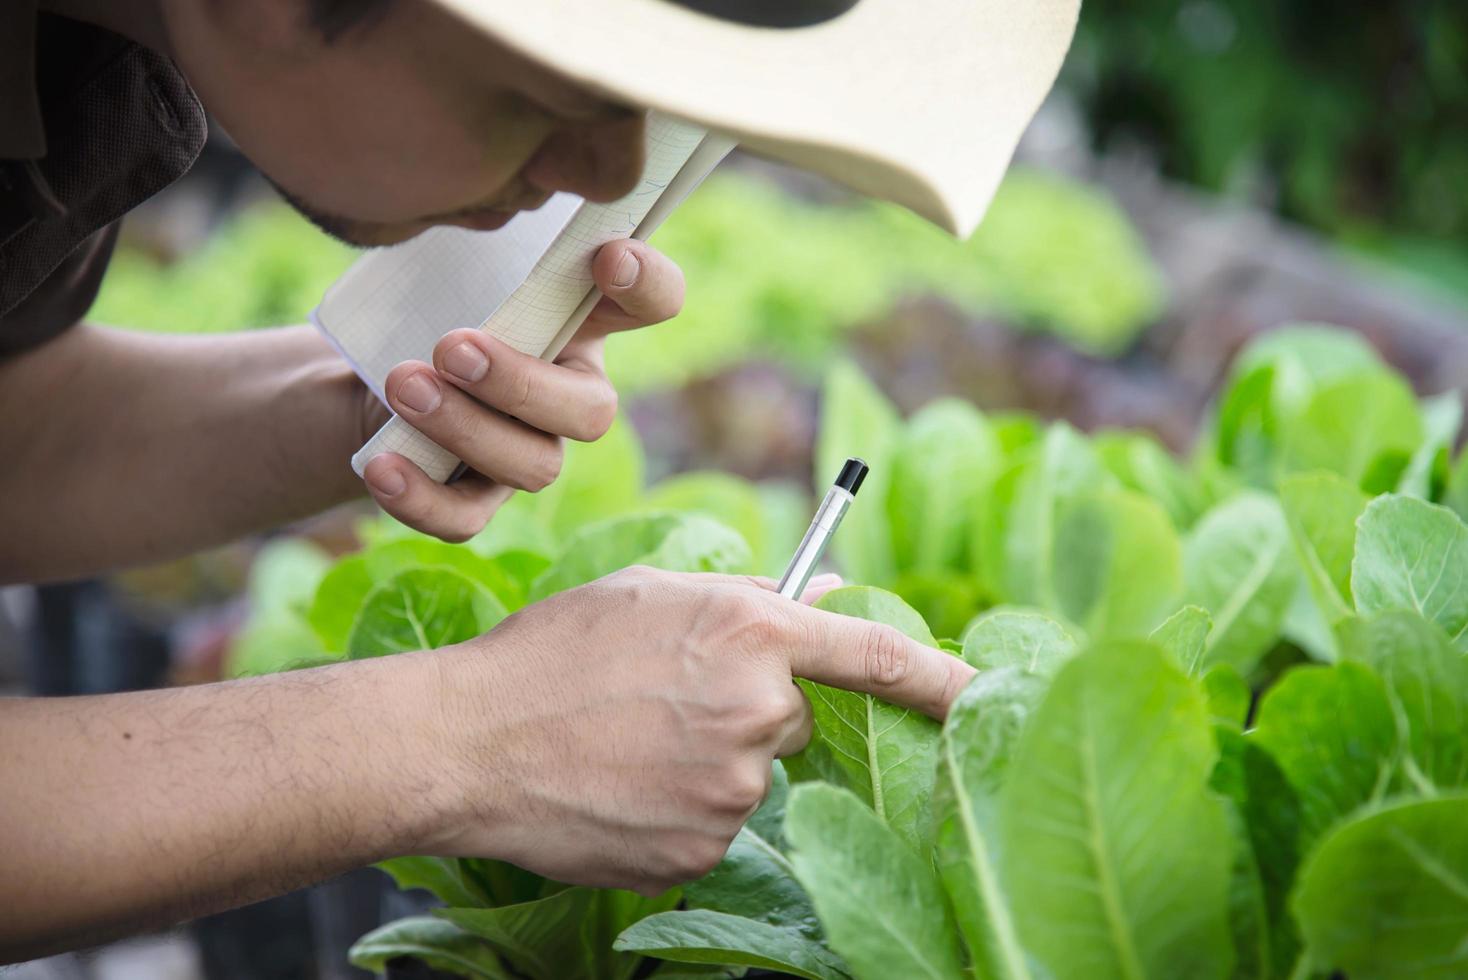 Farm man working in his organic lettuce garden - smart farm people in clean organic agricultural concept photo